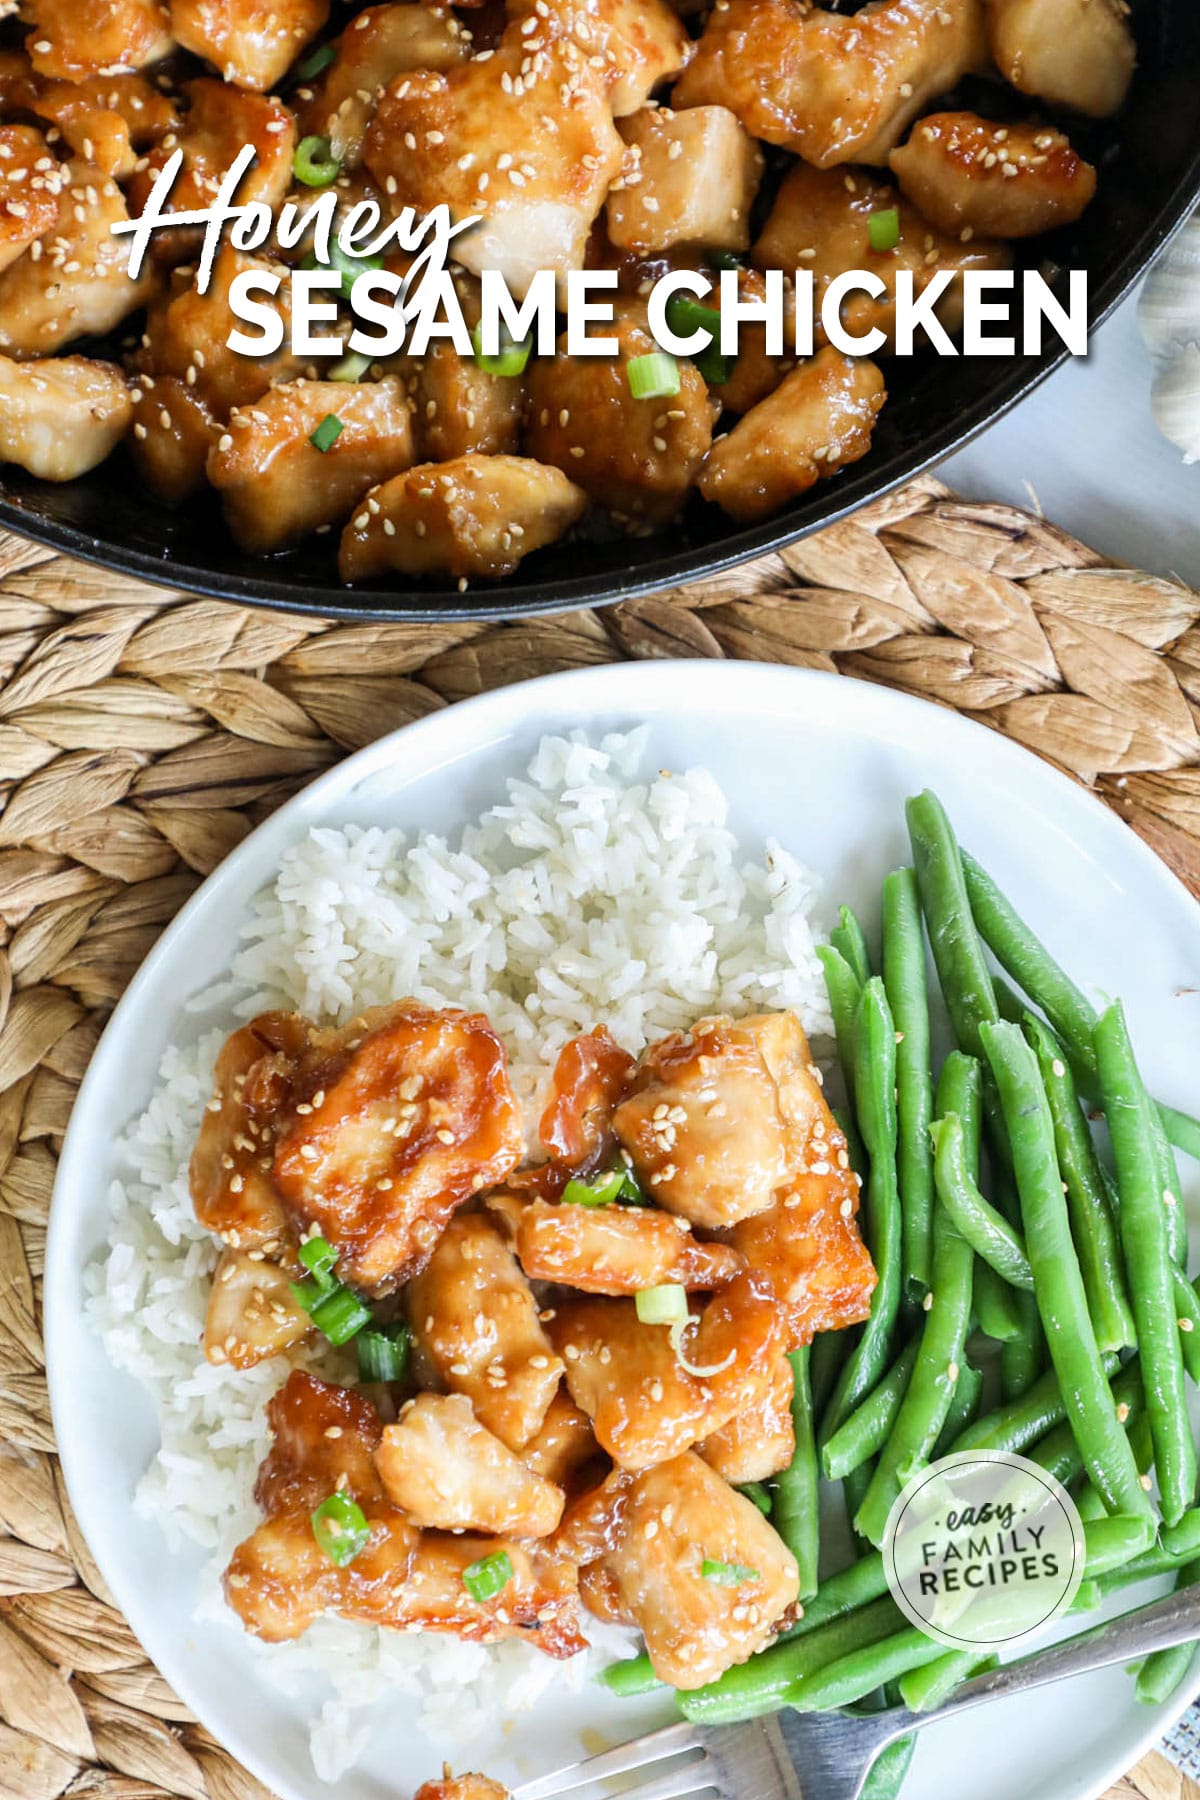 Sesame chicken with honey sauce served with green beans and rice